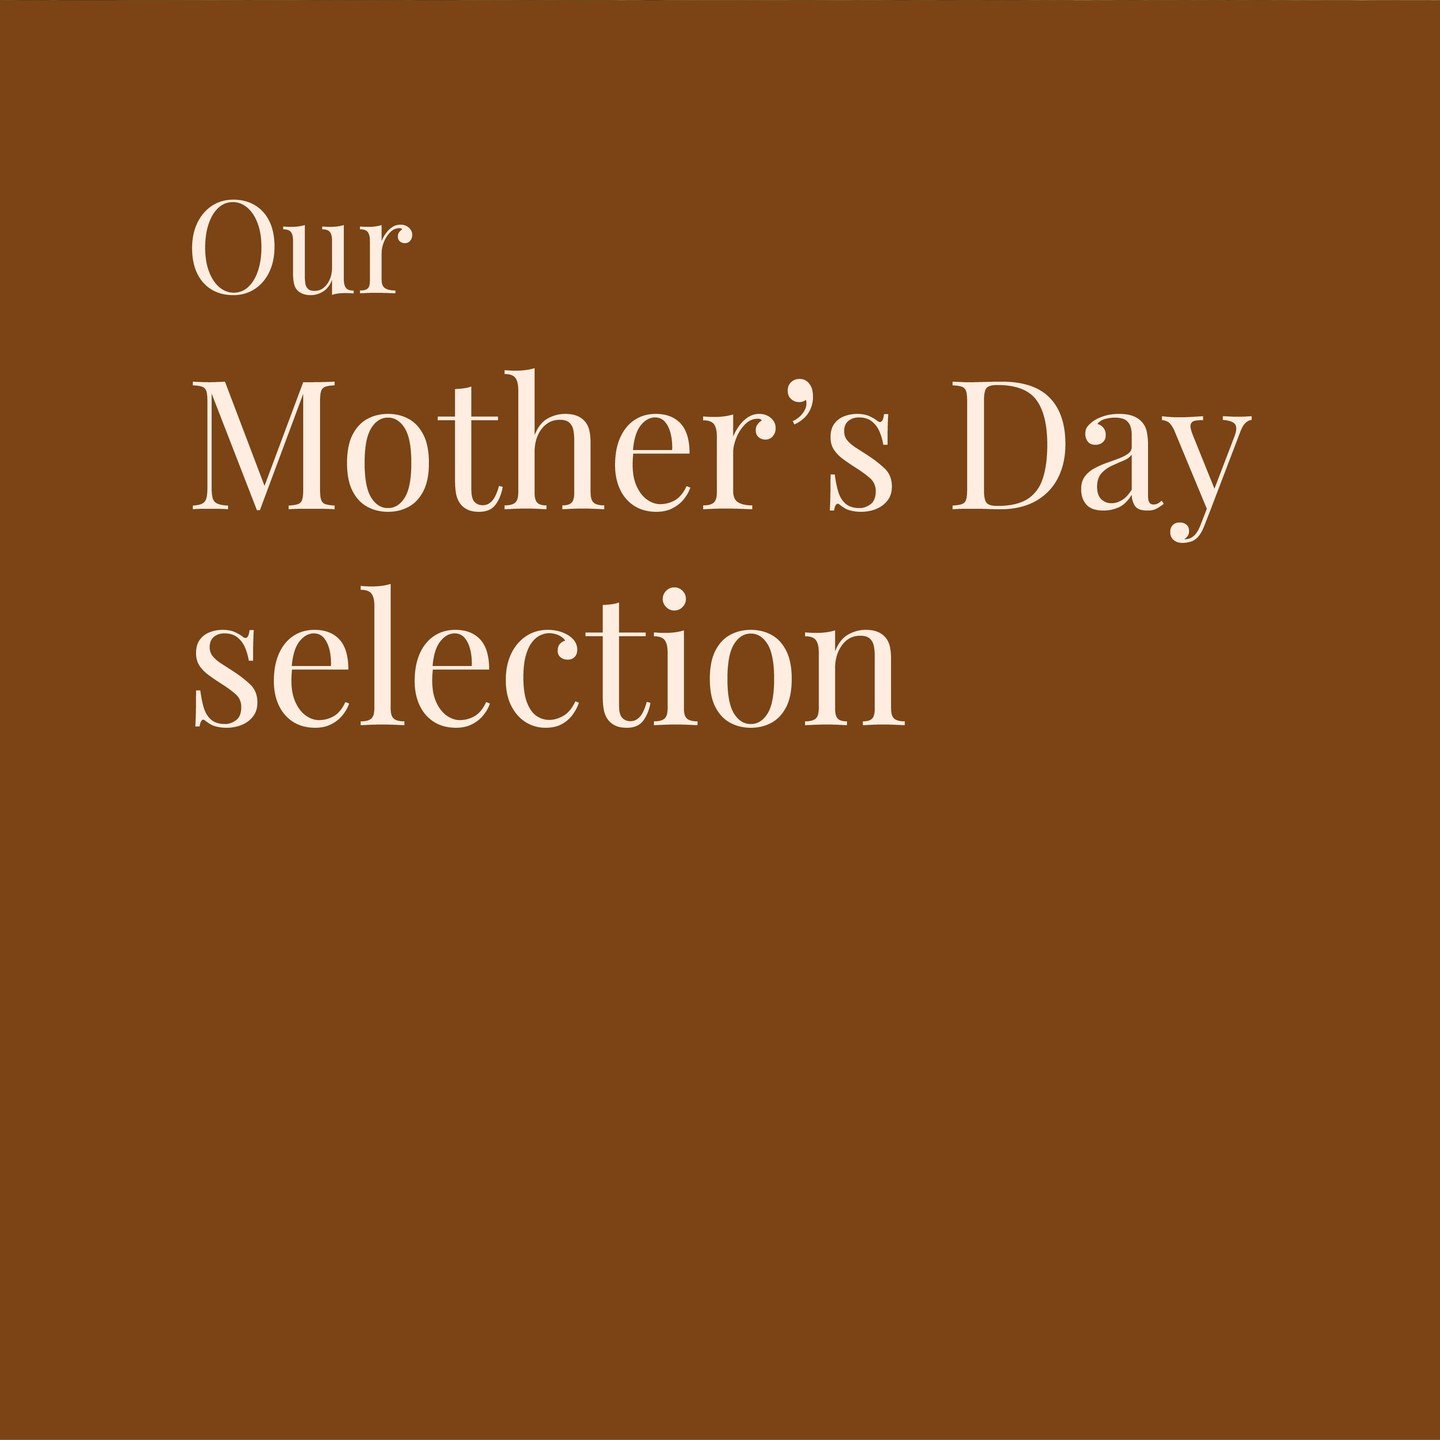 Get ready to celebrate Mother's Day with our curated selection! 🍷 
Make this Mother's Day extra special with our handpicked wines.

#MothersDay #giftideasformothersday #wineslovernyc